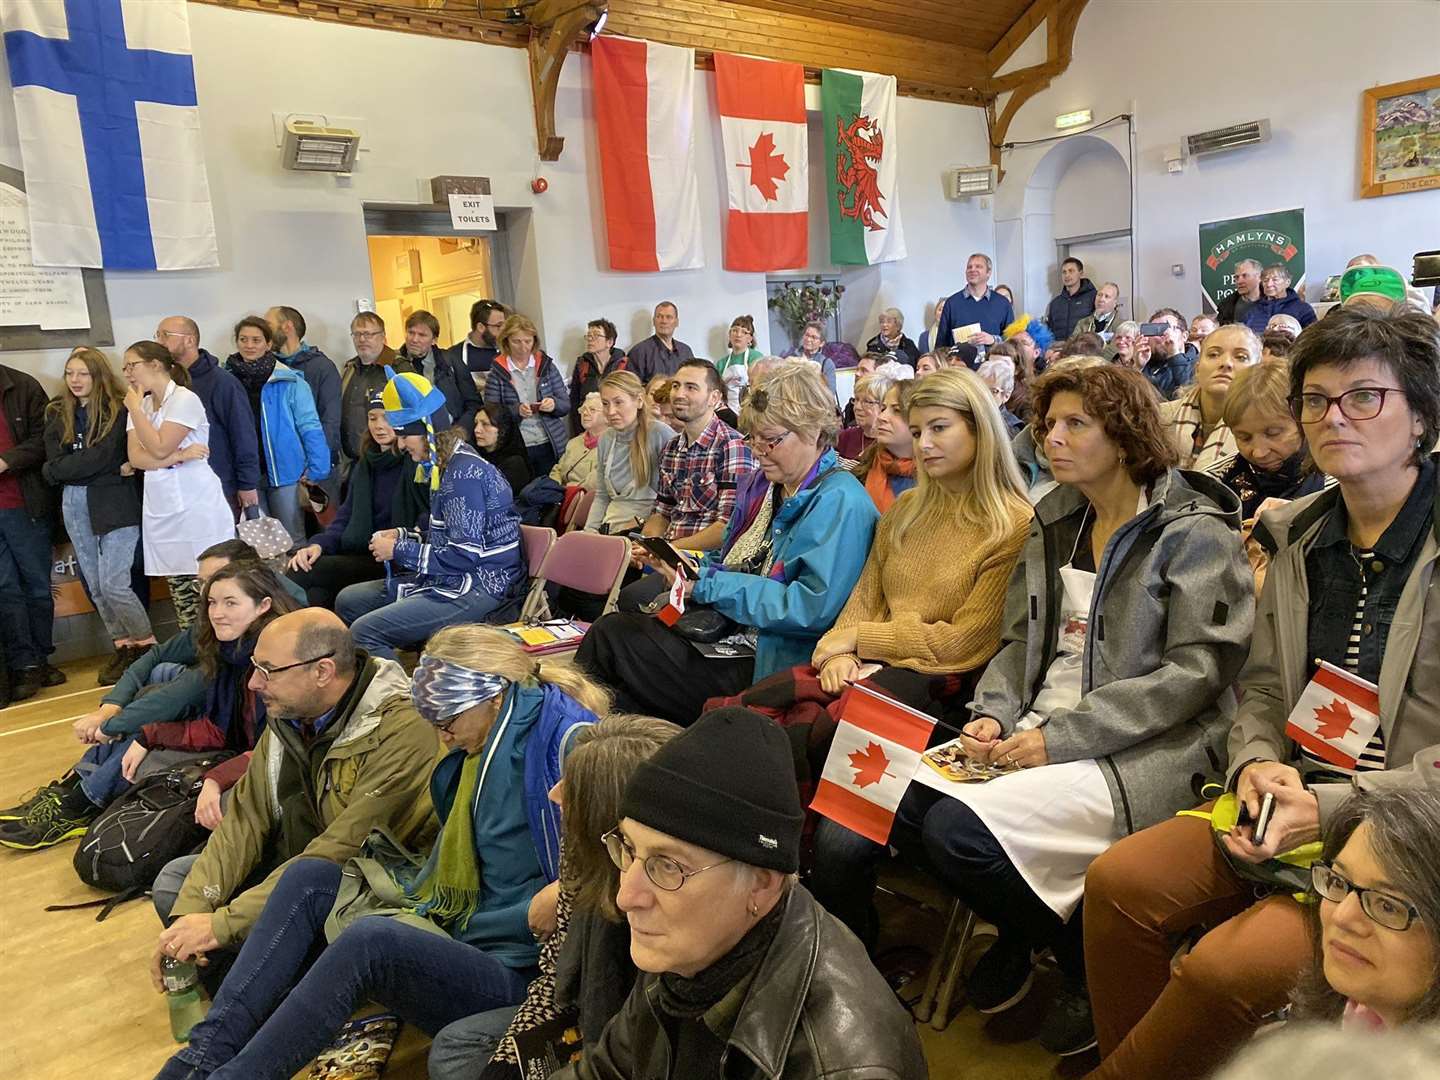 Competitors, supporters and spectators await the final results of the 2019 competition before Covid moved the contest online.